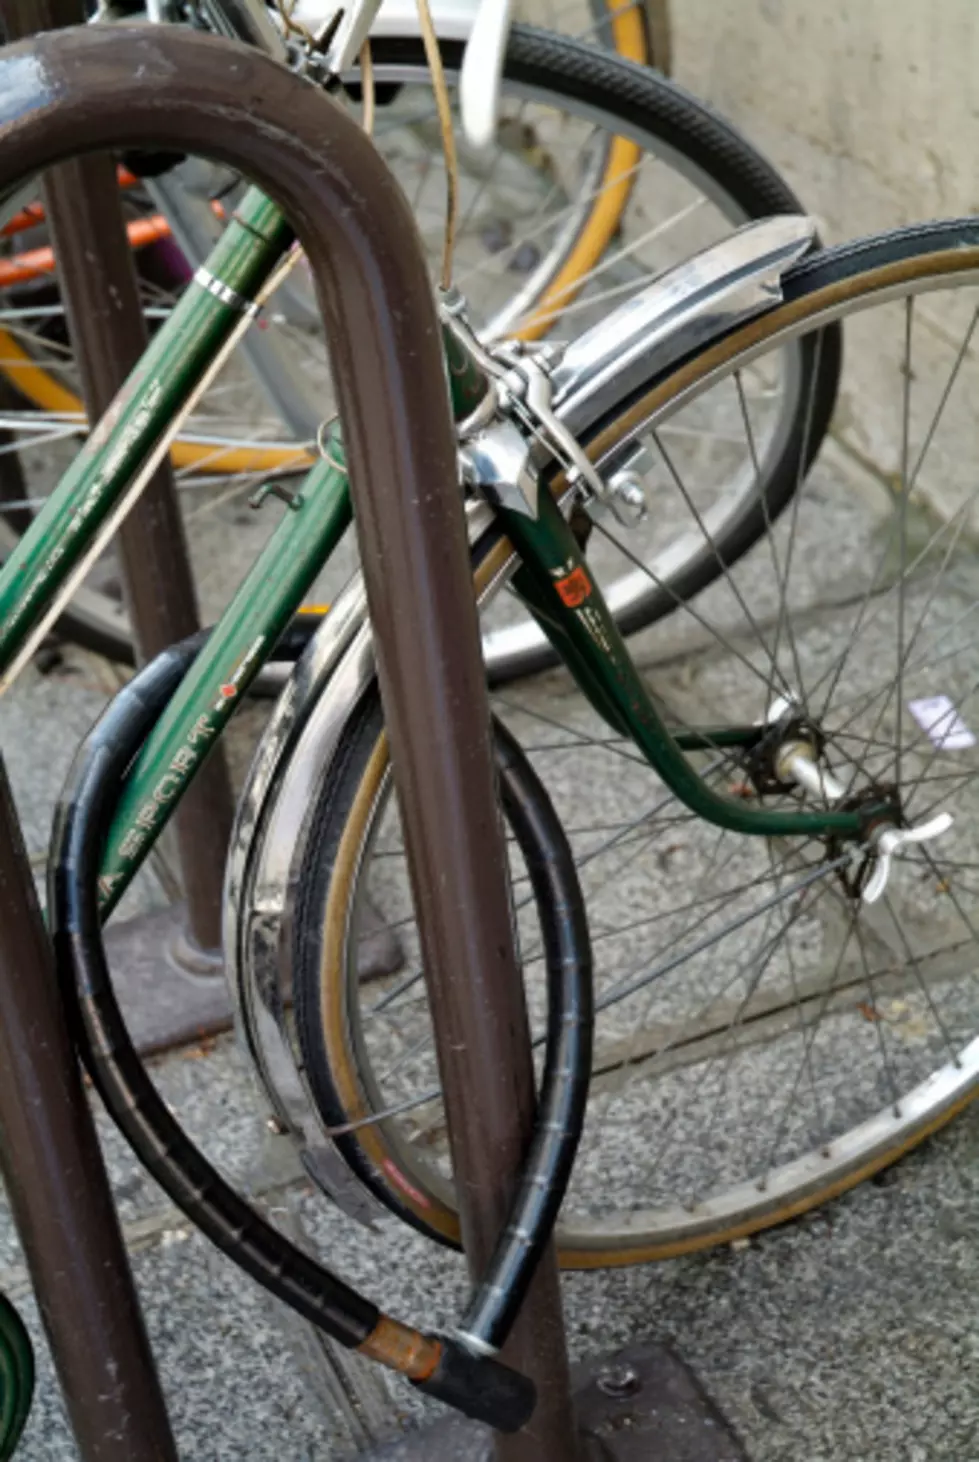 Public Information Officer Says Bike Theft is &#8220;Crime of Opportunity&#8221;